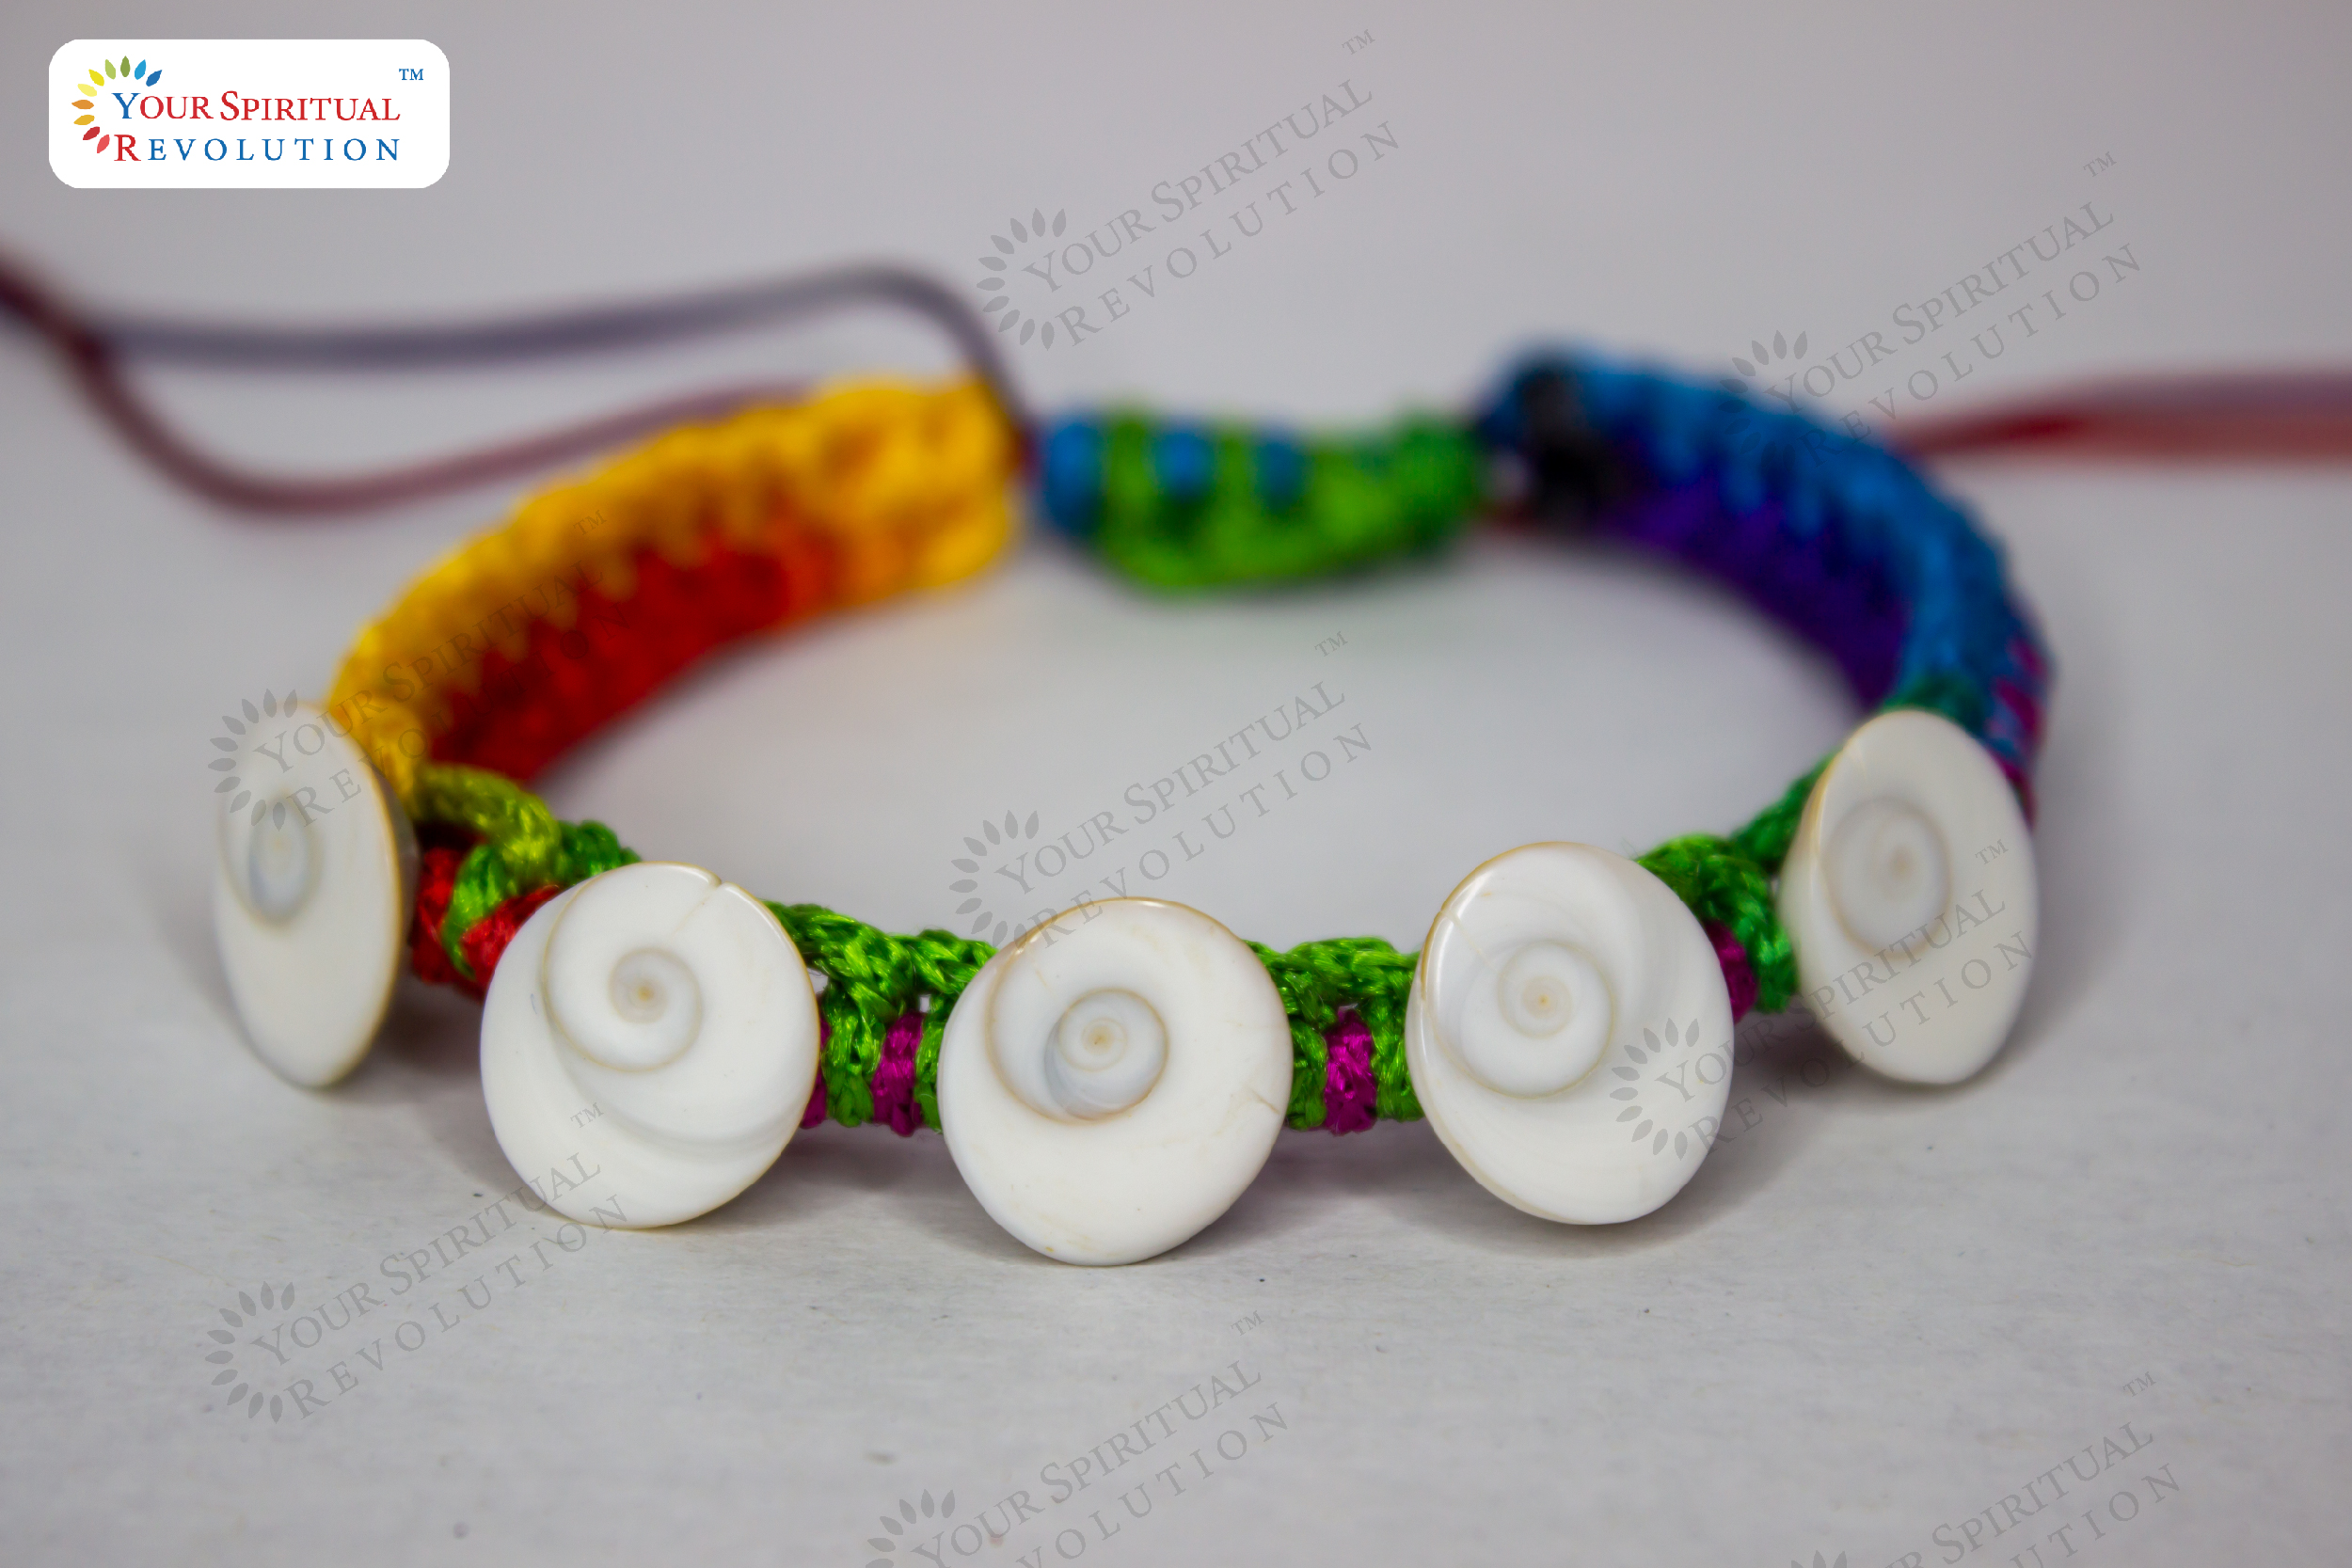 Buy Gomati Chakra Adjustable Bracelet With Elastic Band for Men and Women  Online in India - Etsy